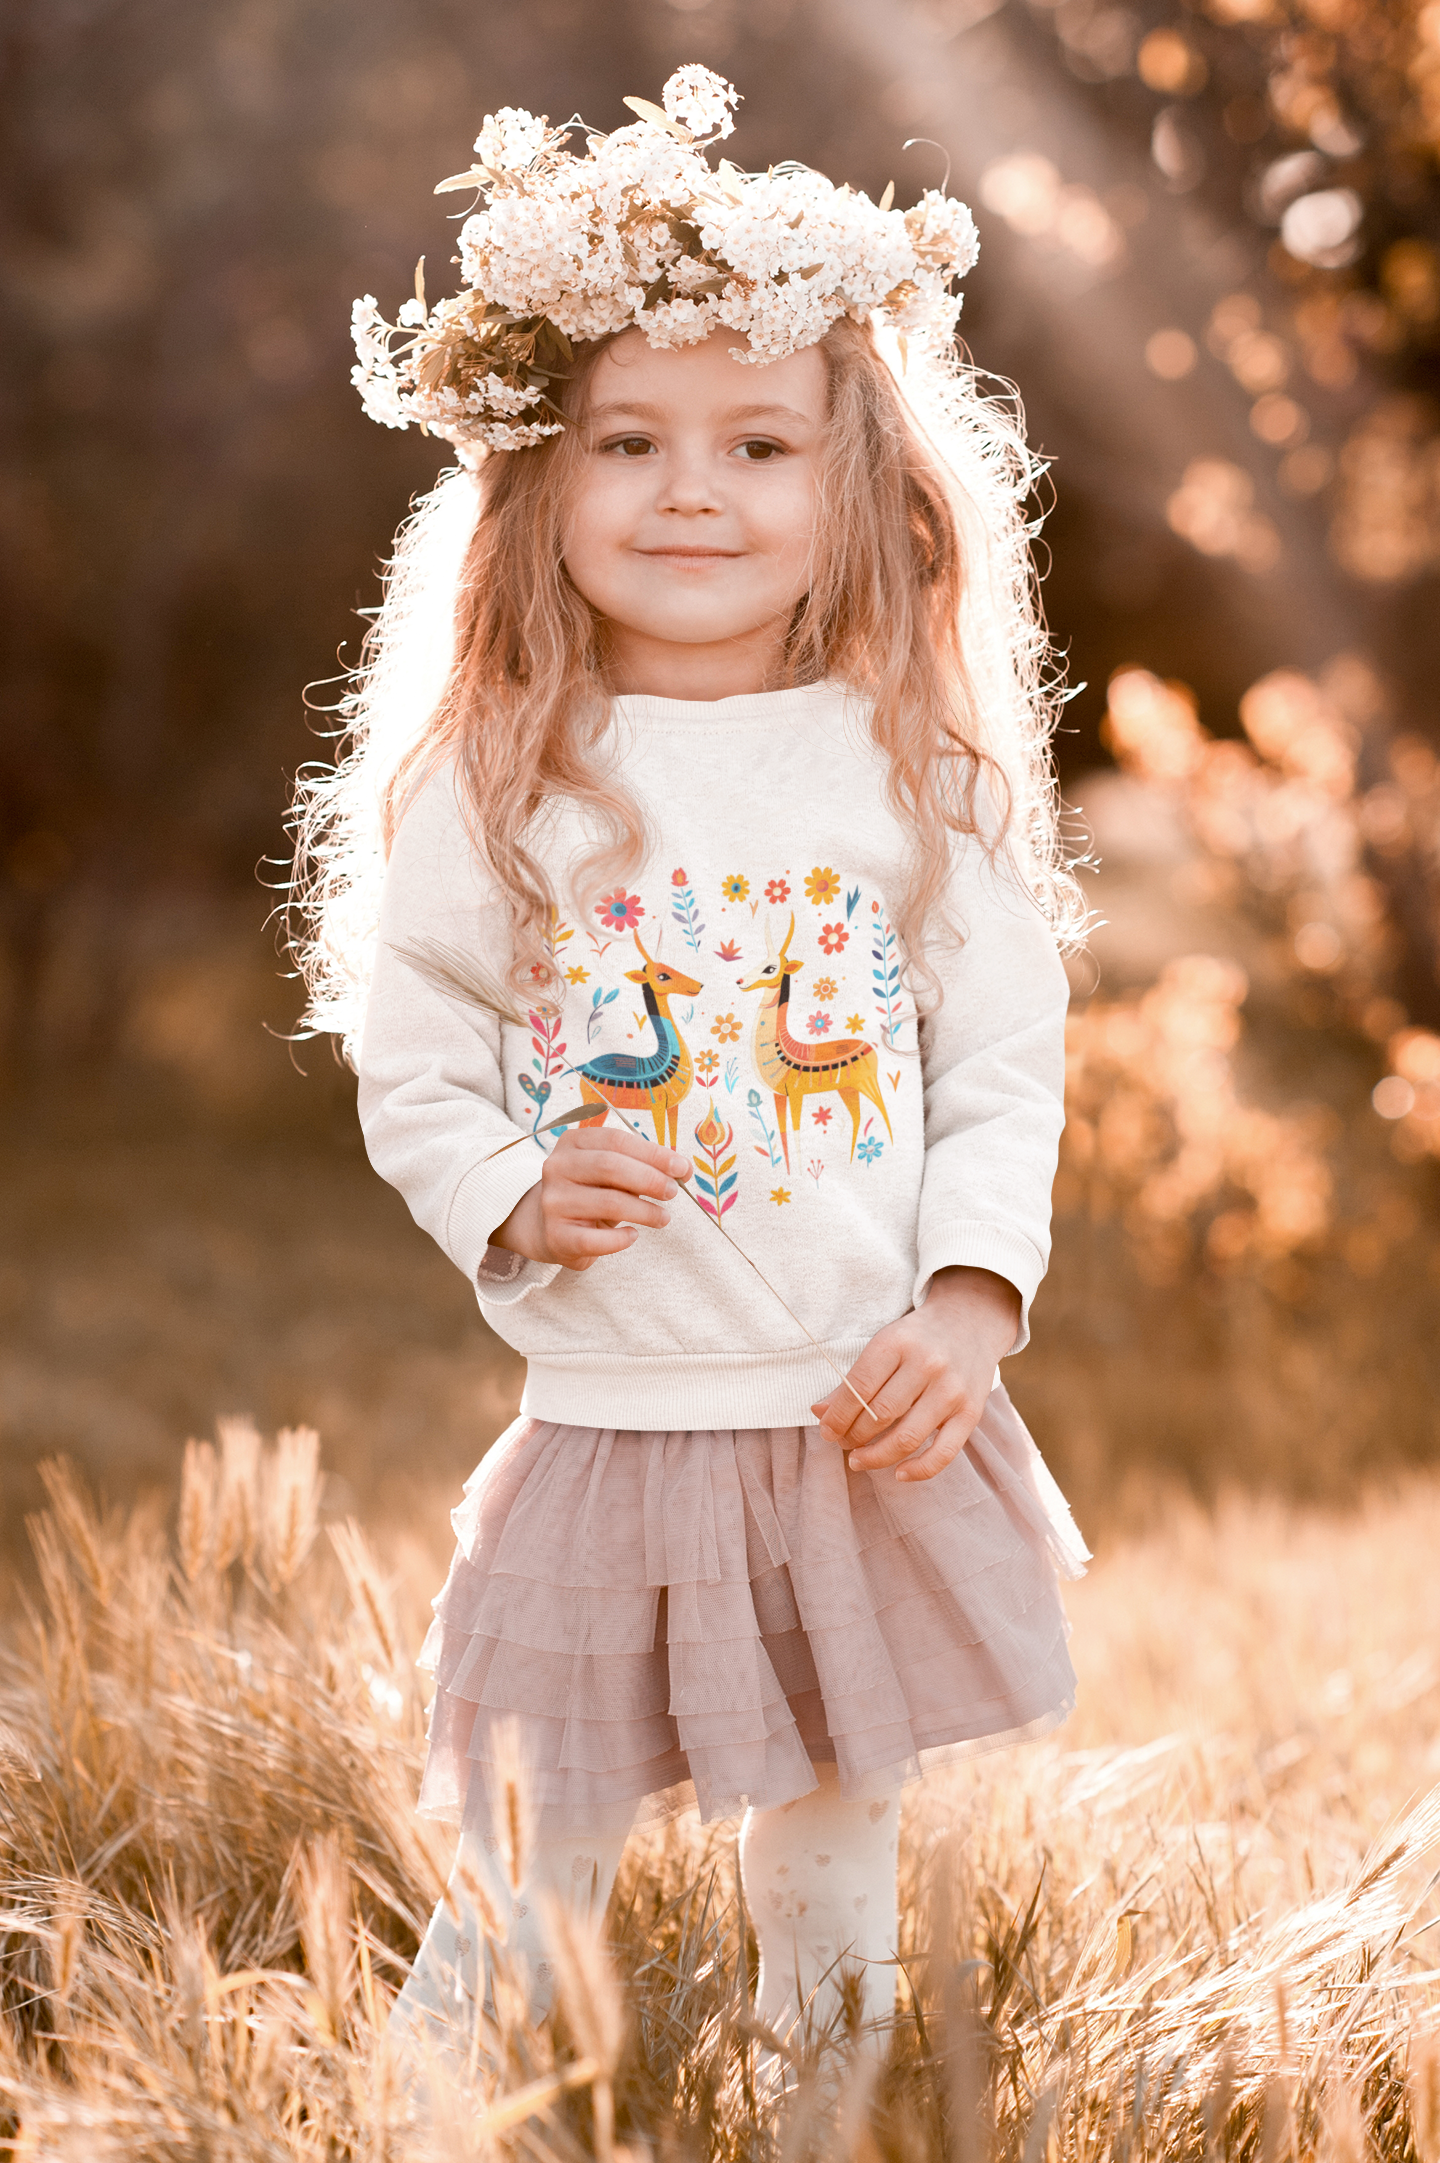 Girl in a sunny field, wearing a sweater with the cheerful gazelles design